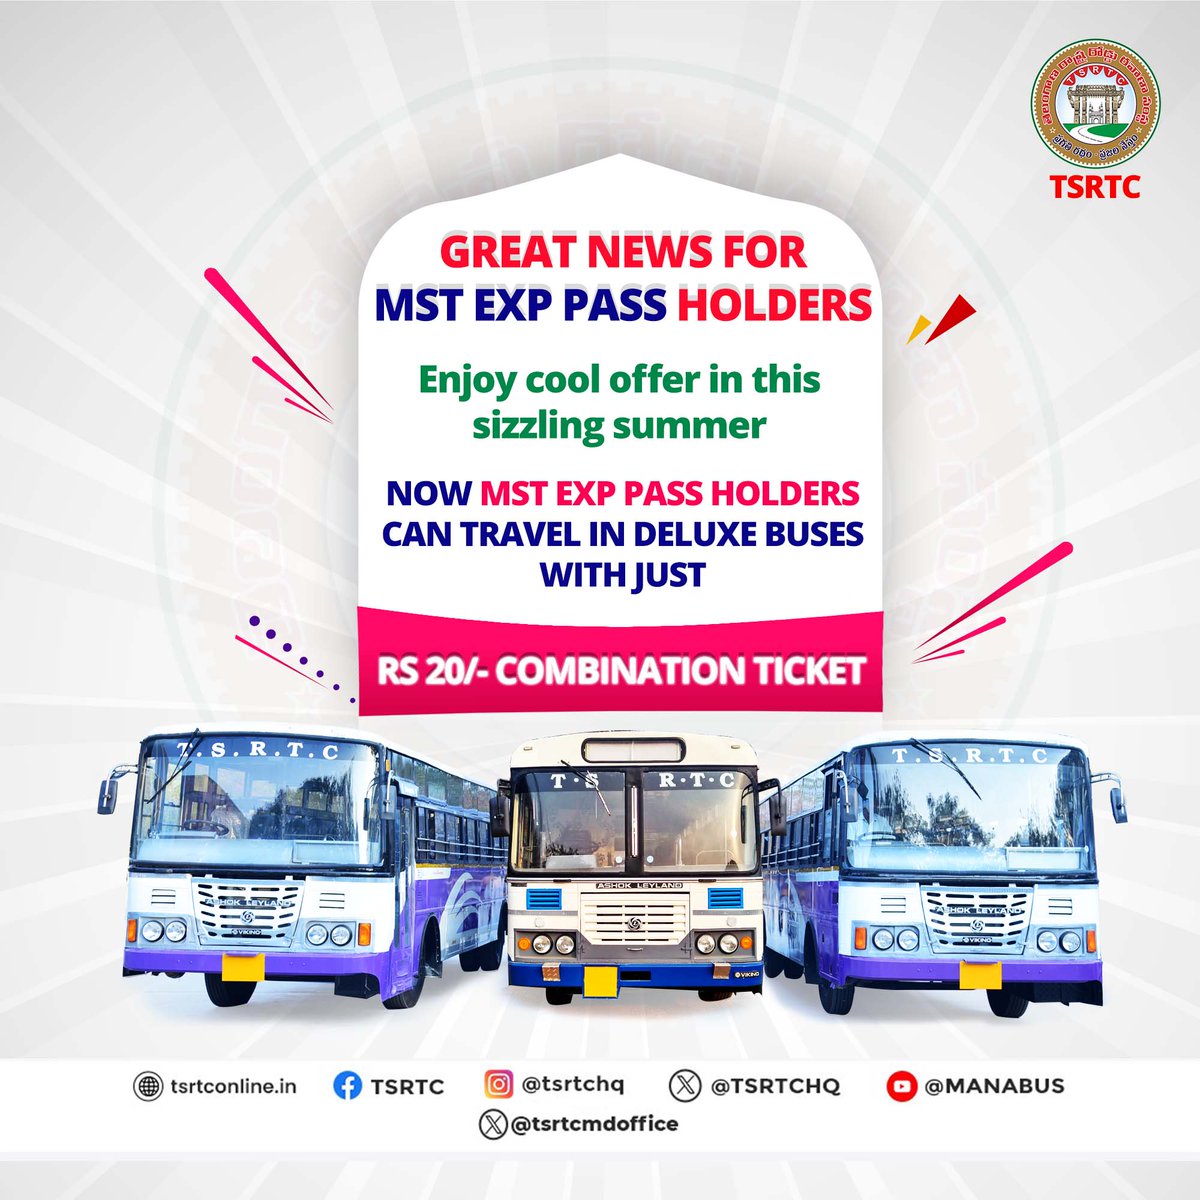 MST Pass Holders, keep moving in style this summer. TSRTC's combo ticket gives you access to deluxe buses for just Rs.20. Stay cool and get where you need to be! .
.
.
#tsrtc #tsrtcbuses #publictransport #acbuses #rajadani #metrobuses #pushpak #lahari
#publictransportation